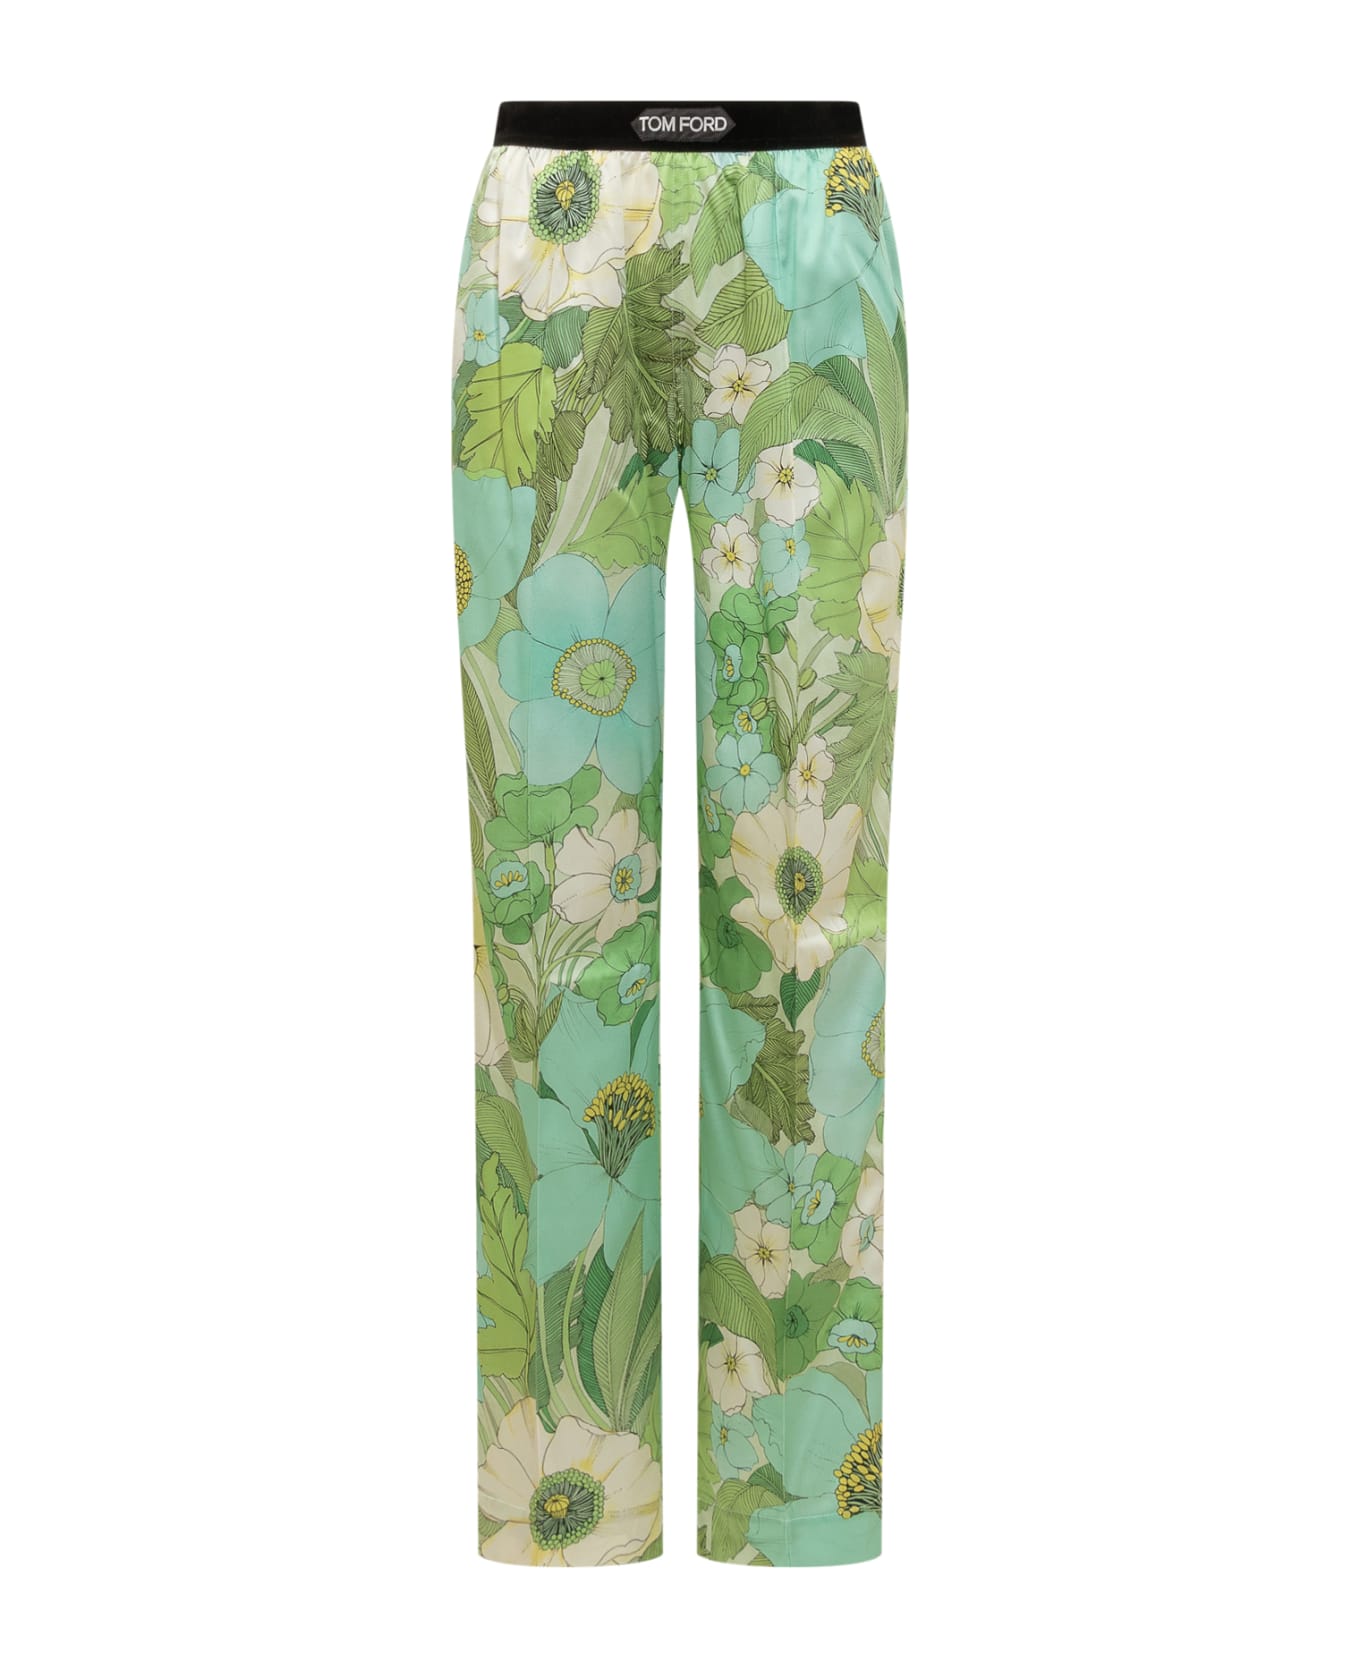 Tom Ford Pants With Floral Decoration - AQUA PALE GREEN